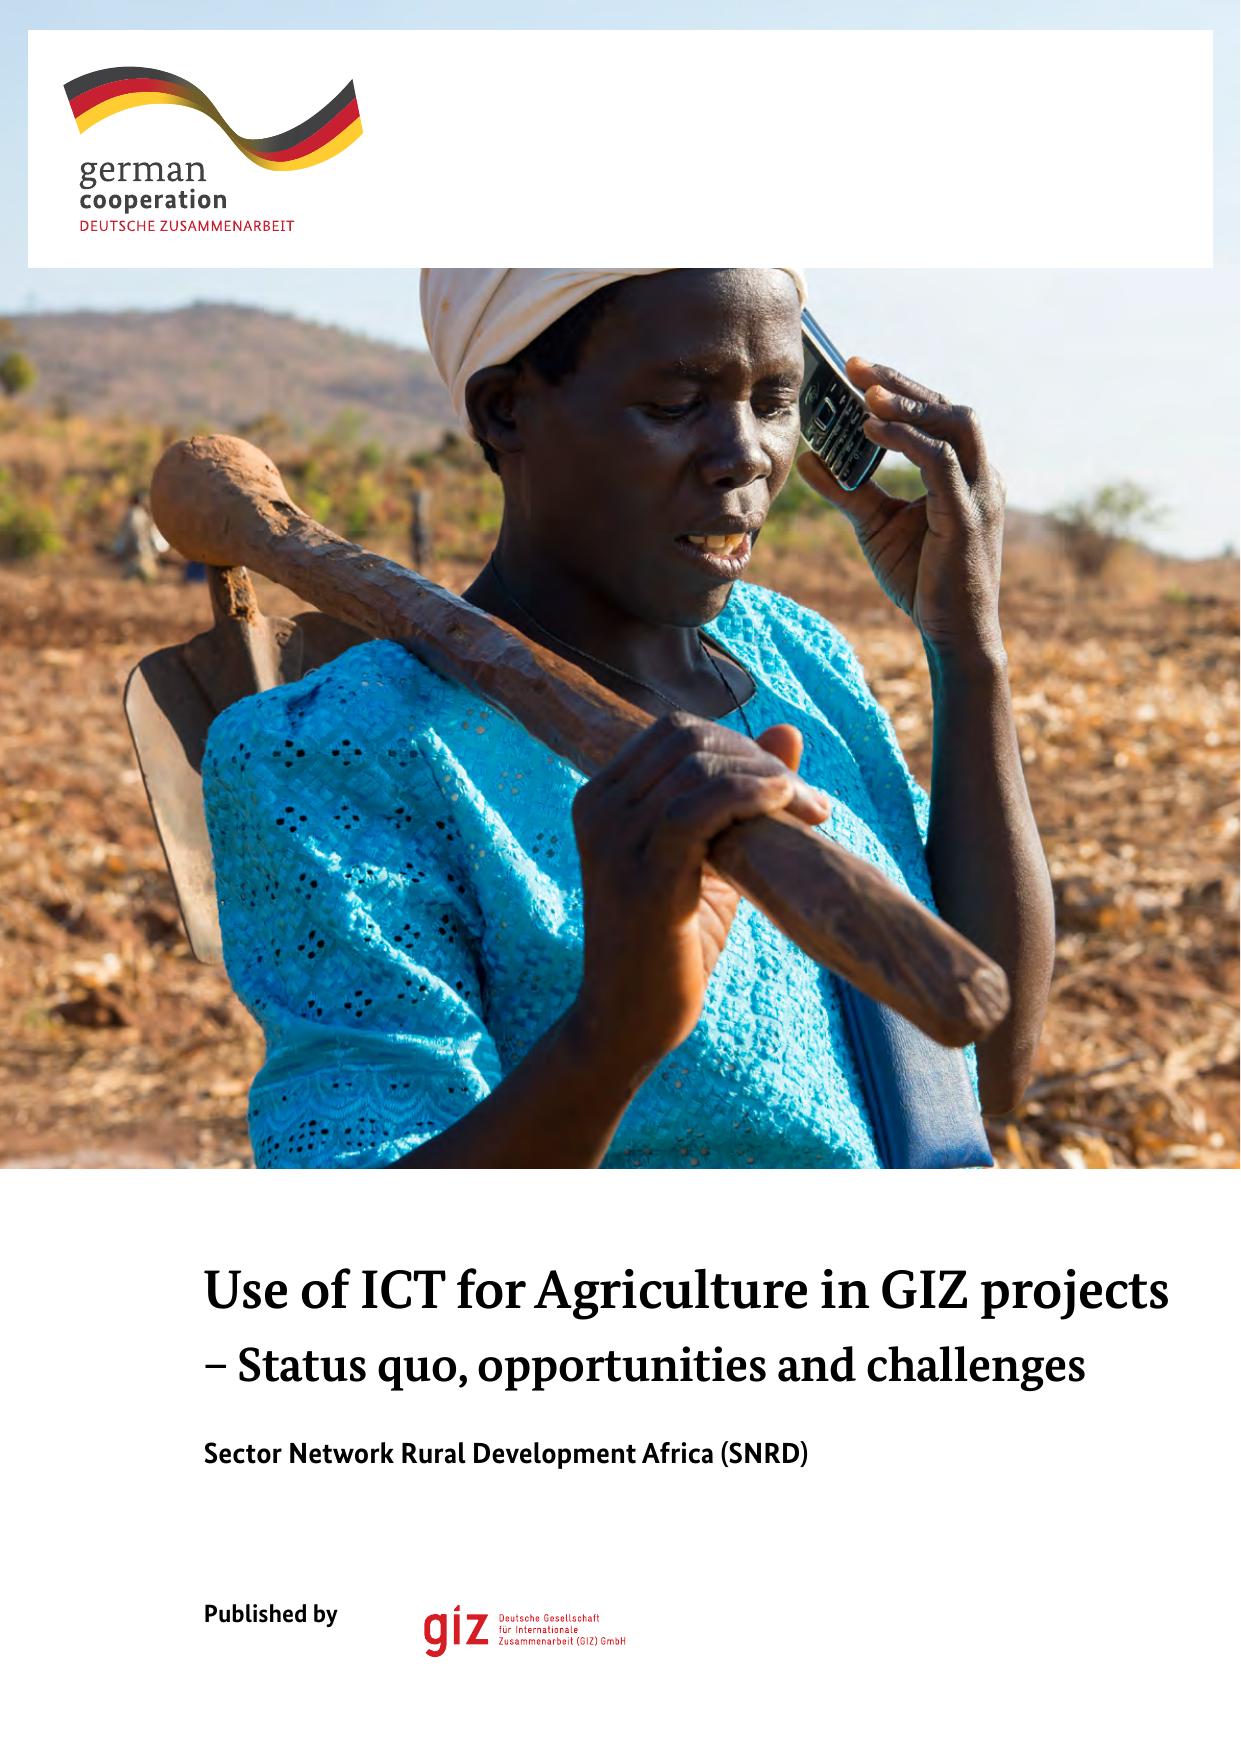 Use of ICT for Agriculture in GIZ projects 2016